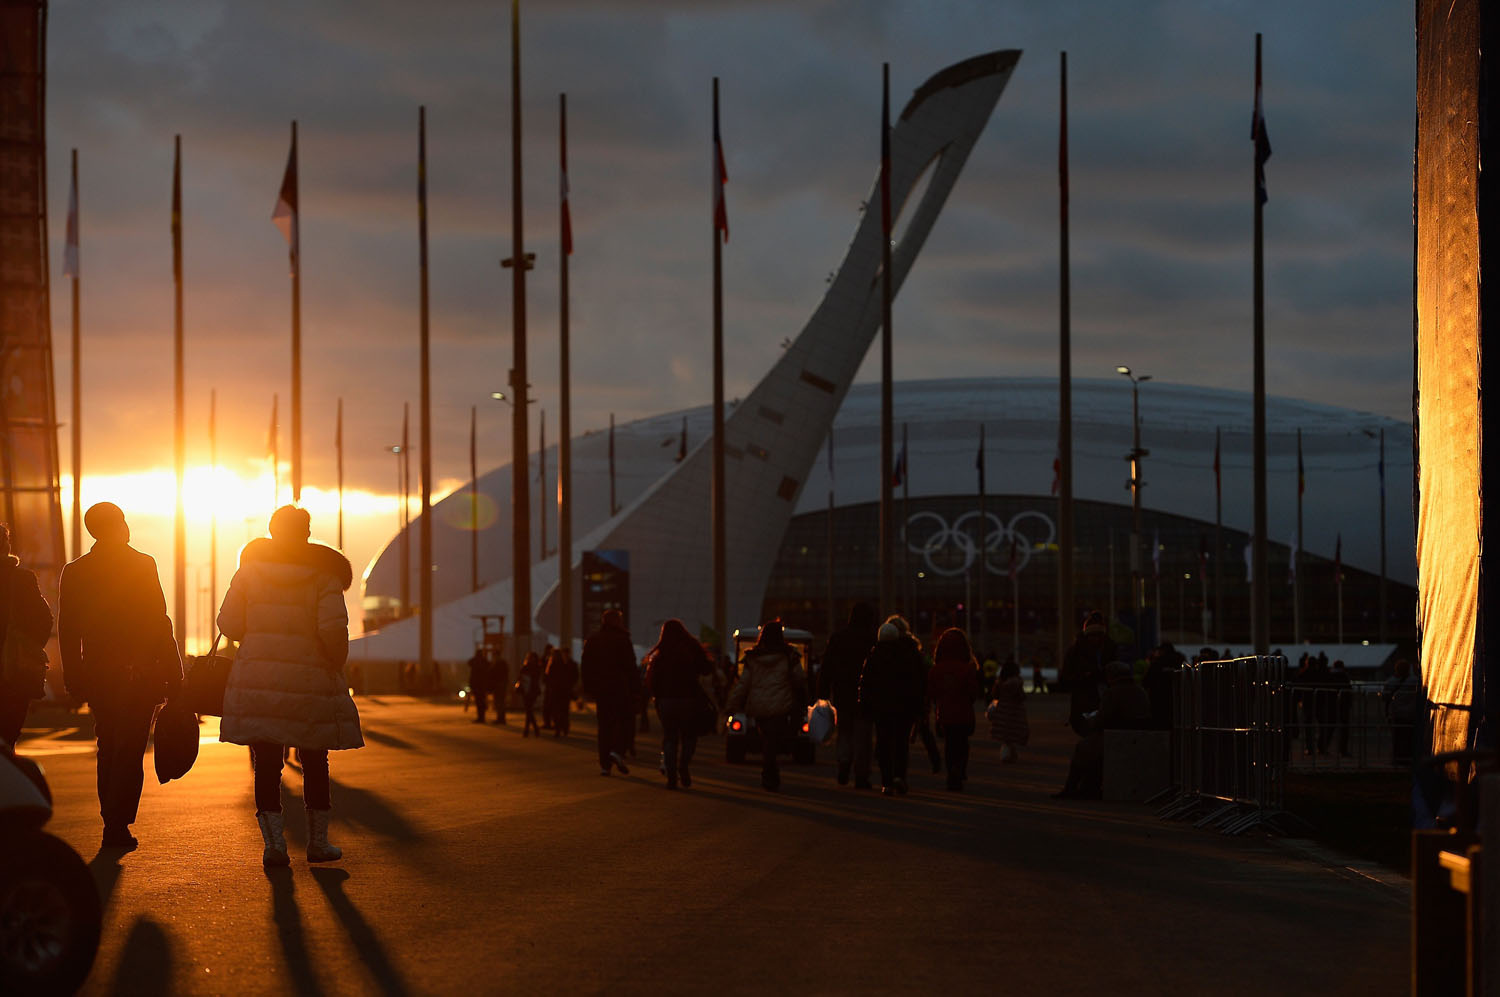 Visitors walk inside the Olympic Park prior to the Sochi 2014 Winter Olympics on February 6, 2014. (Pascal Le Segretain—Getty Images)